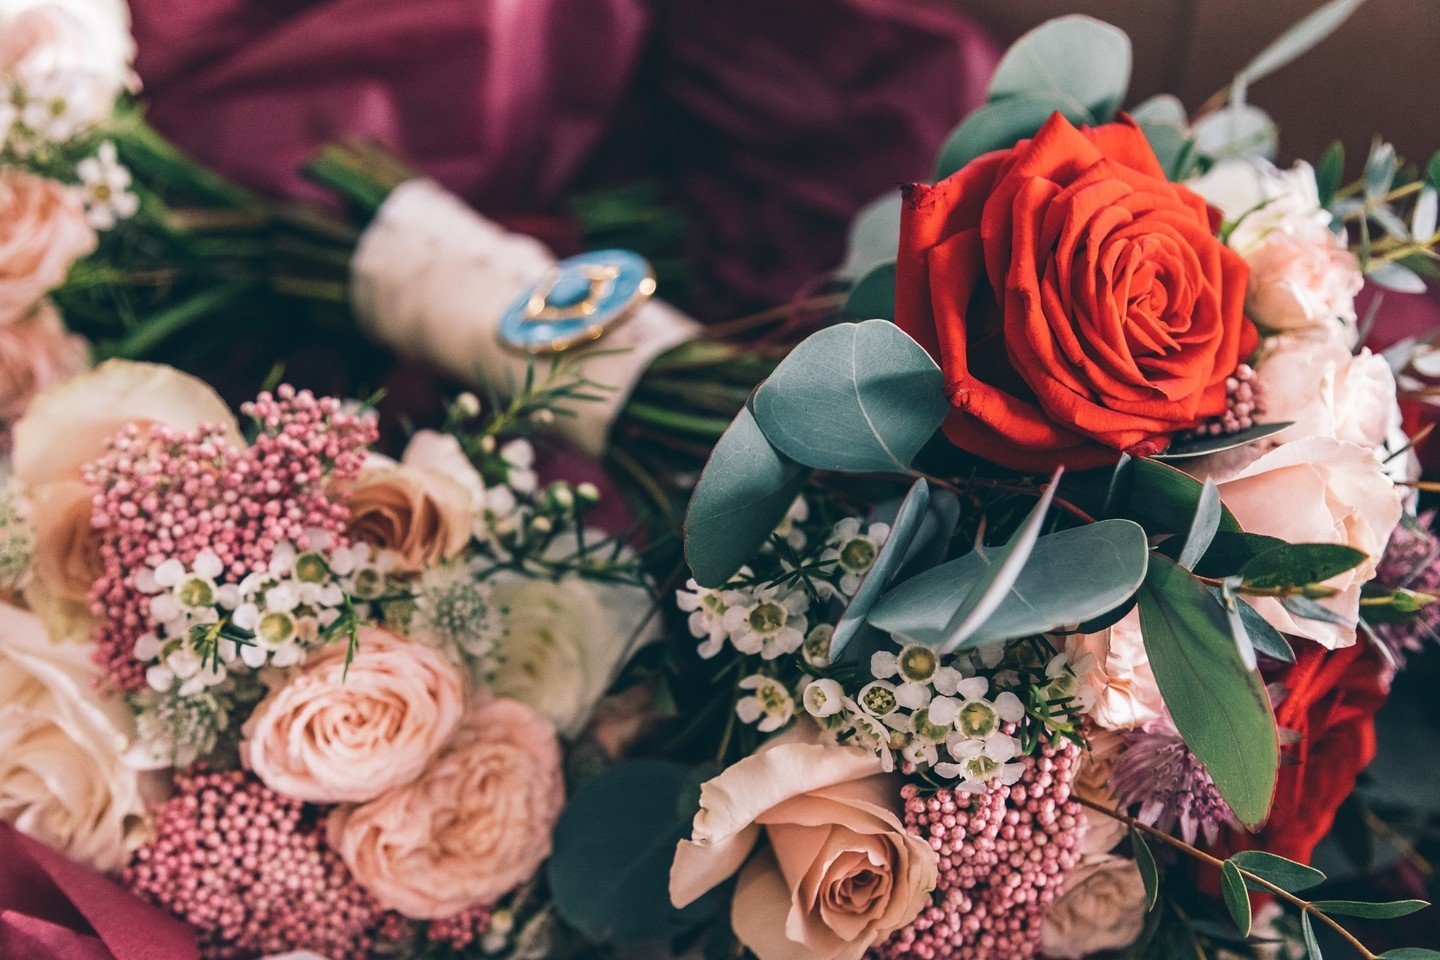 Looking for the perfect finishing touch for your wedding day? Look no further than stunning bridal flowers from Flowers With Passion! From romantic roses to whimsical wildflowers, there's a bouquet to suit every style and budget. Whether you're dream